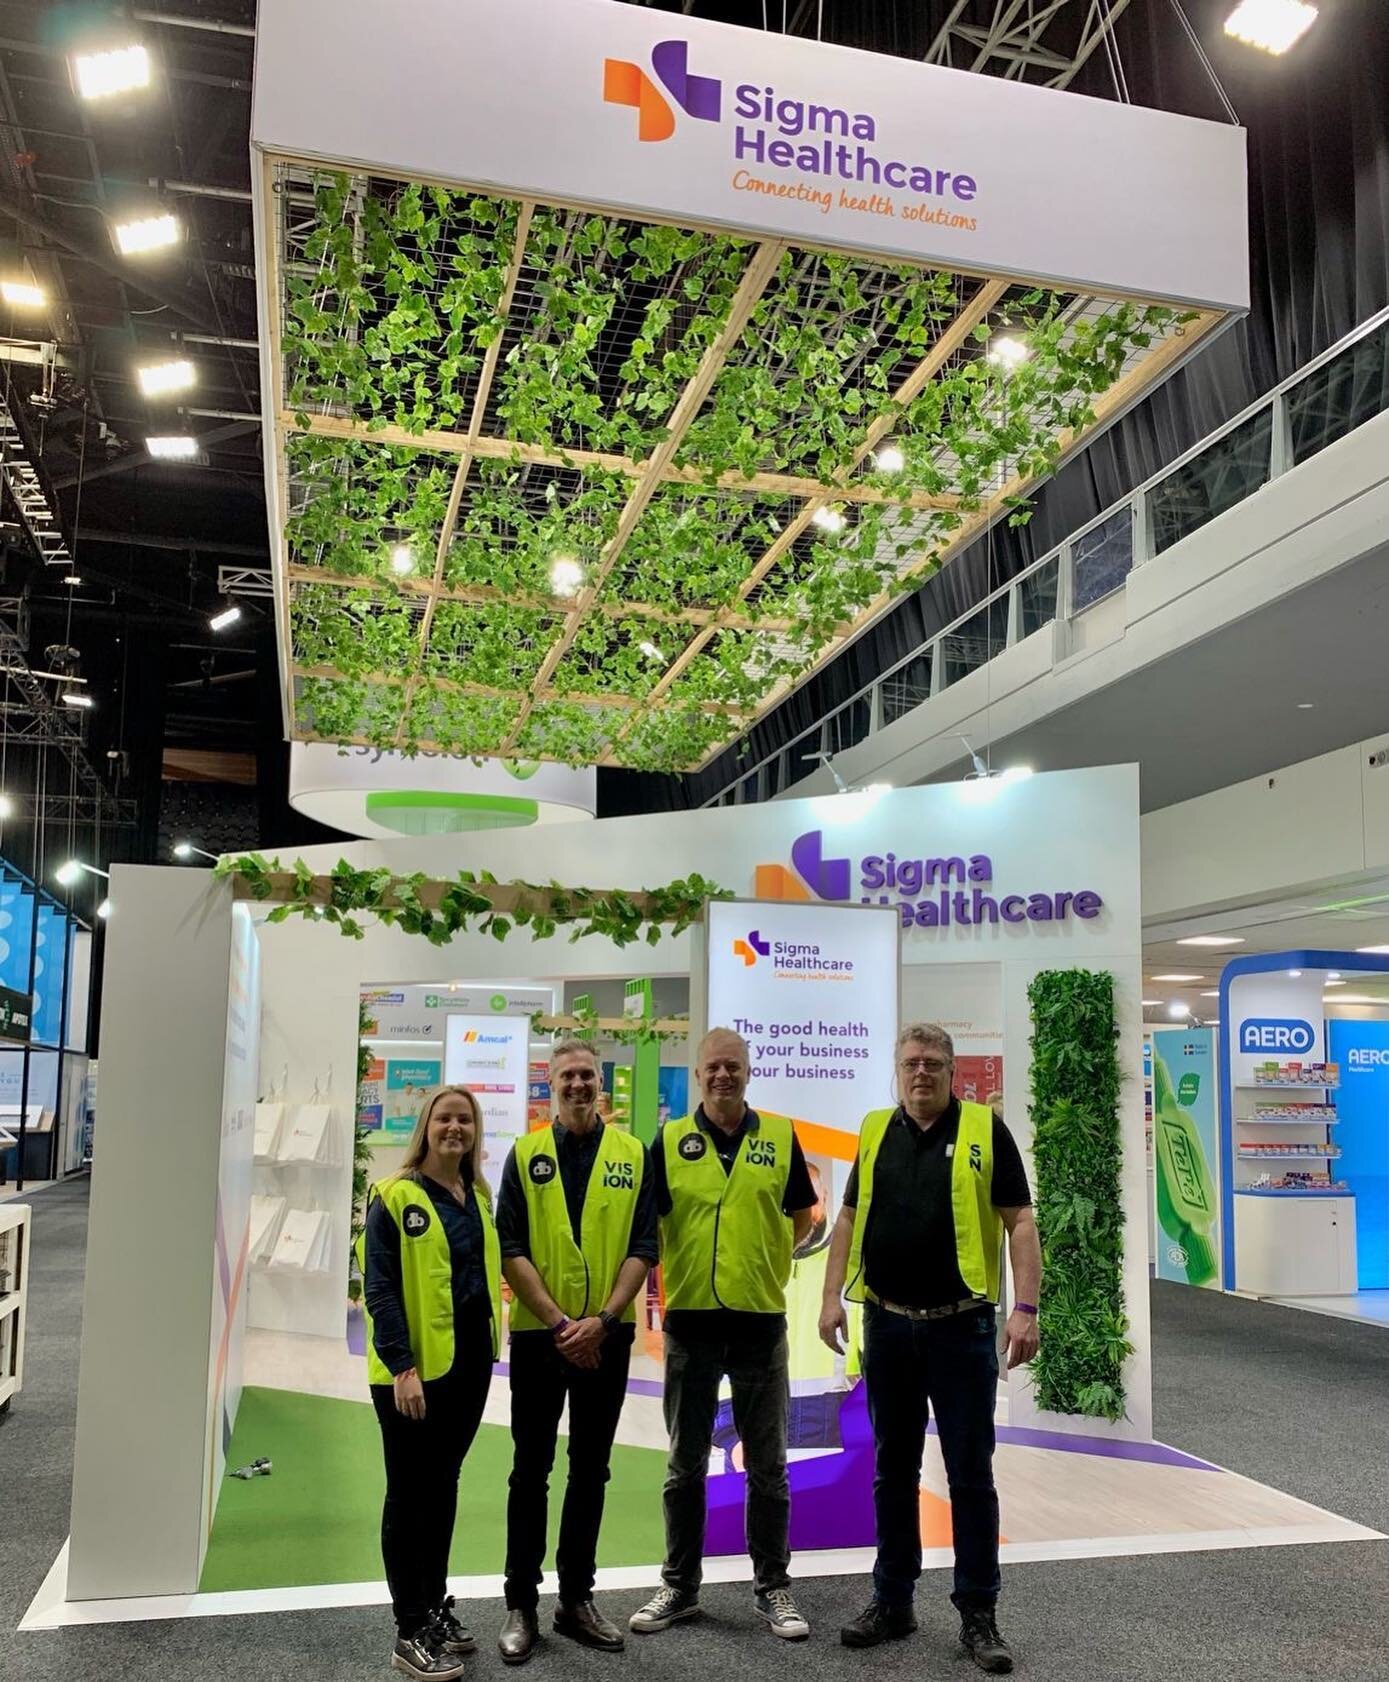 &ldquo;Success is where preparation and opportunity meet&rdquo;
We have done all the heavy lifting and APP 2021 is now open. &ldquo;7&rdquo; impressive custom stands produced by the dB team are ready for 6000+ pharmacy professionals to connect, infor